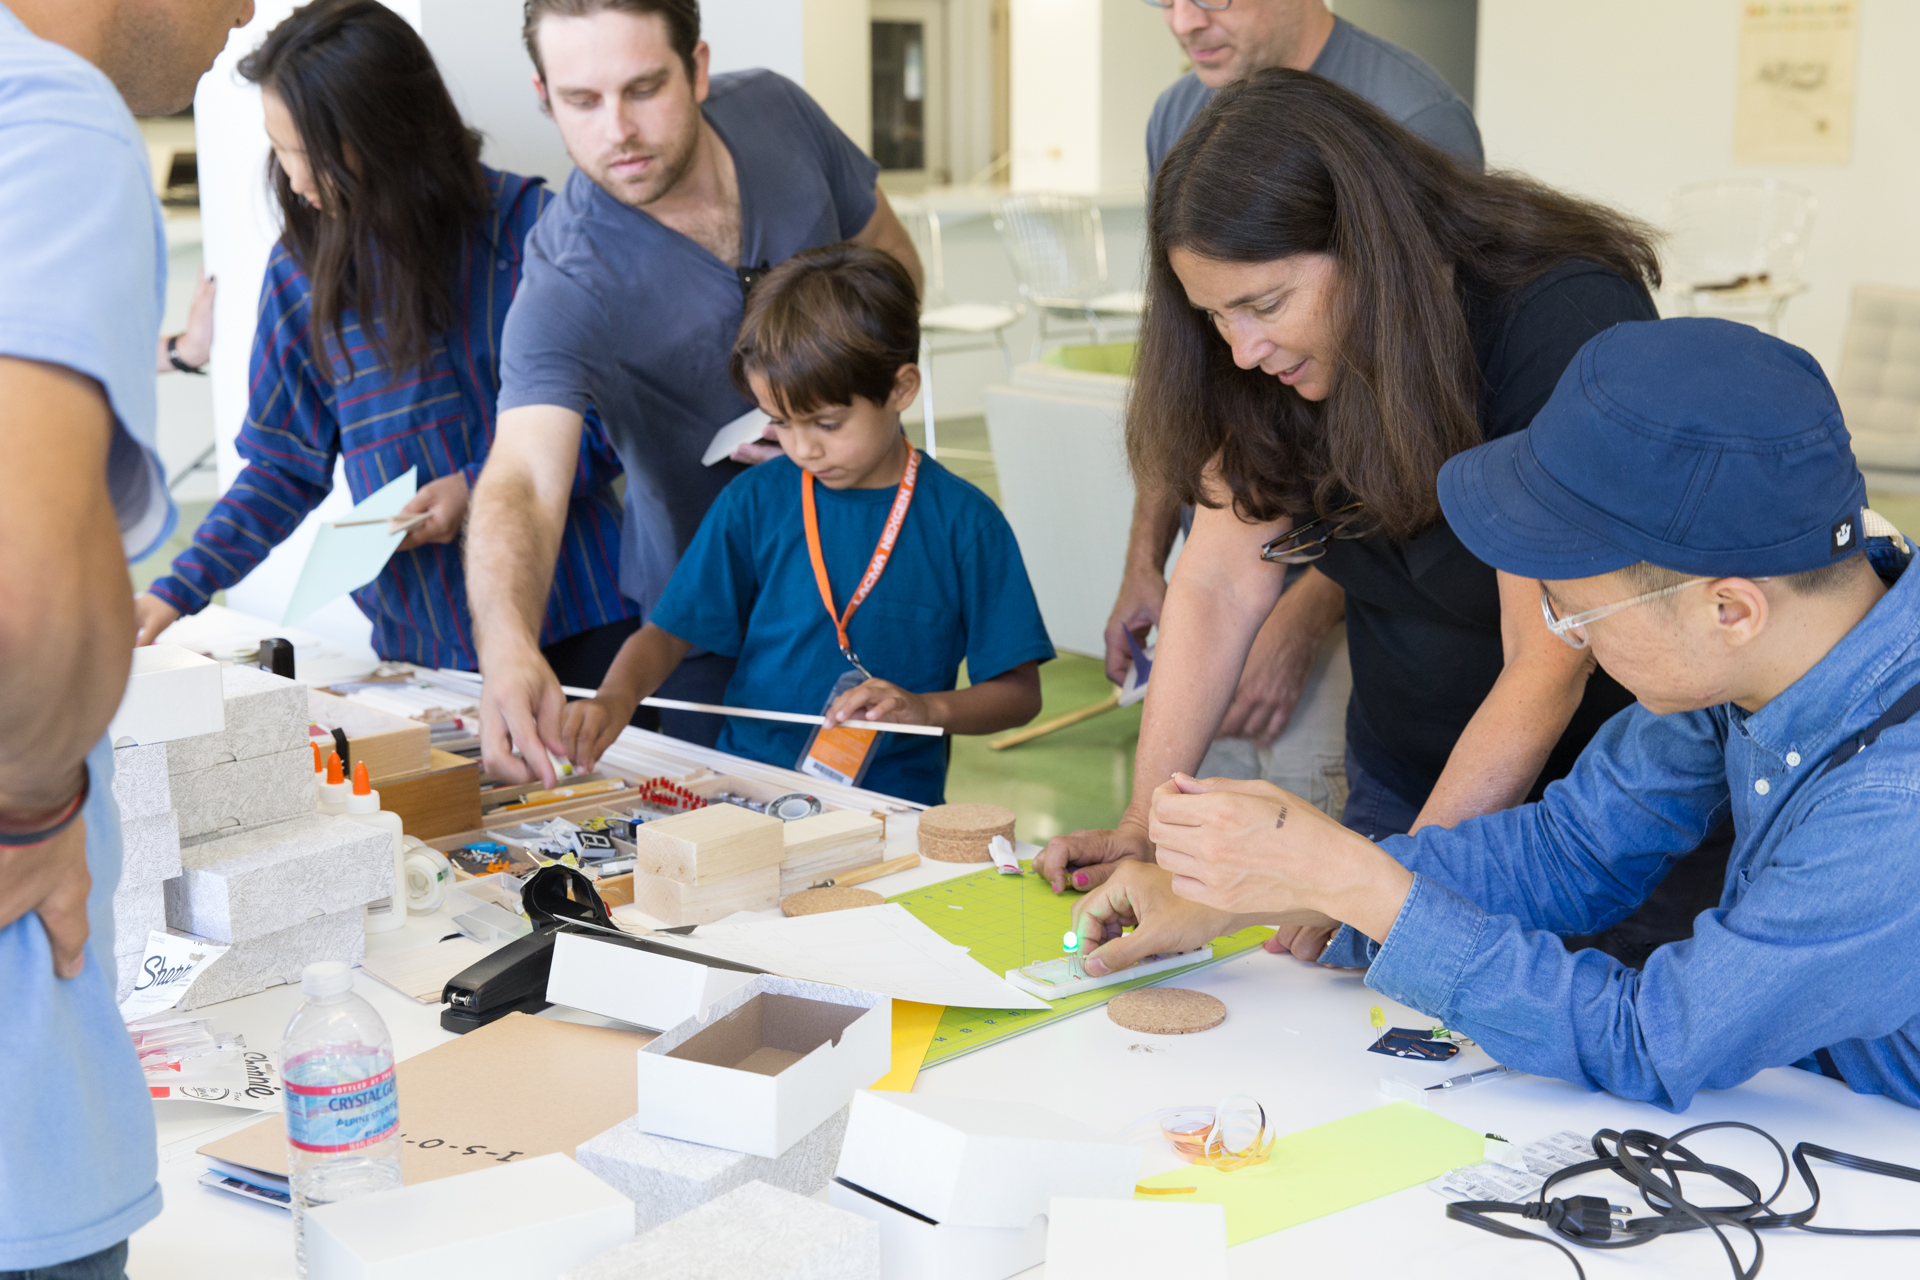 From the Timekeeper Invention Club workshop at LACMA, held on August 30, 2014